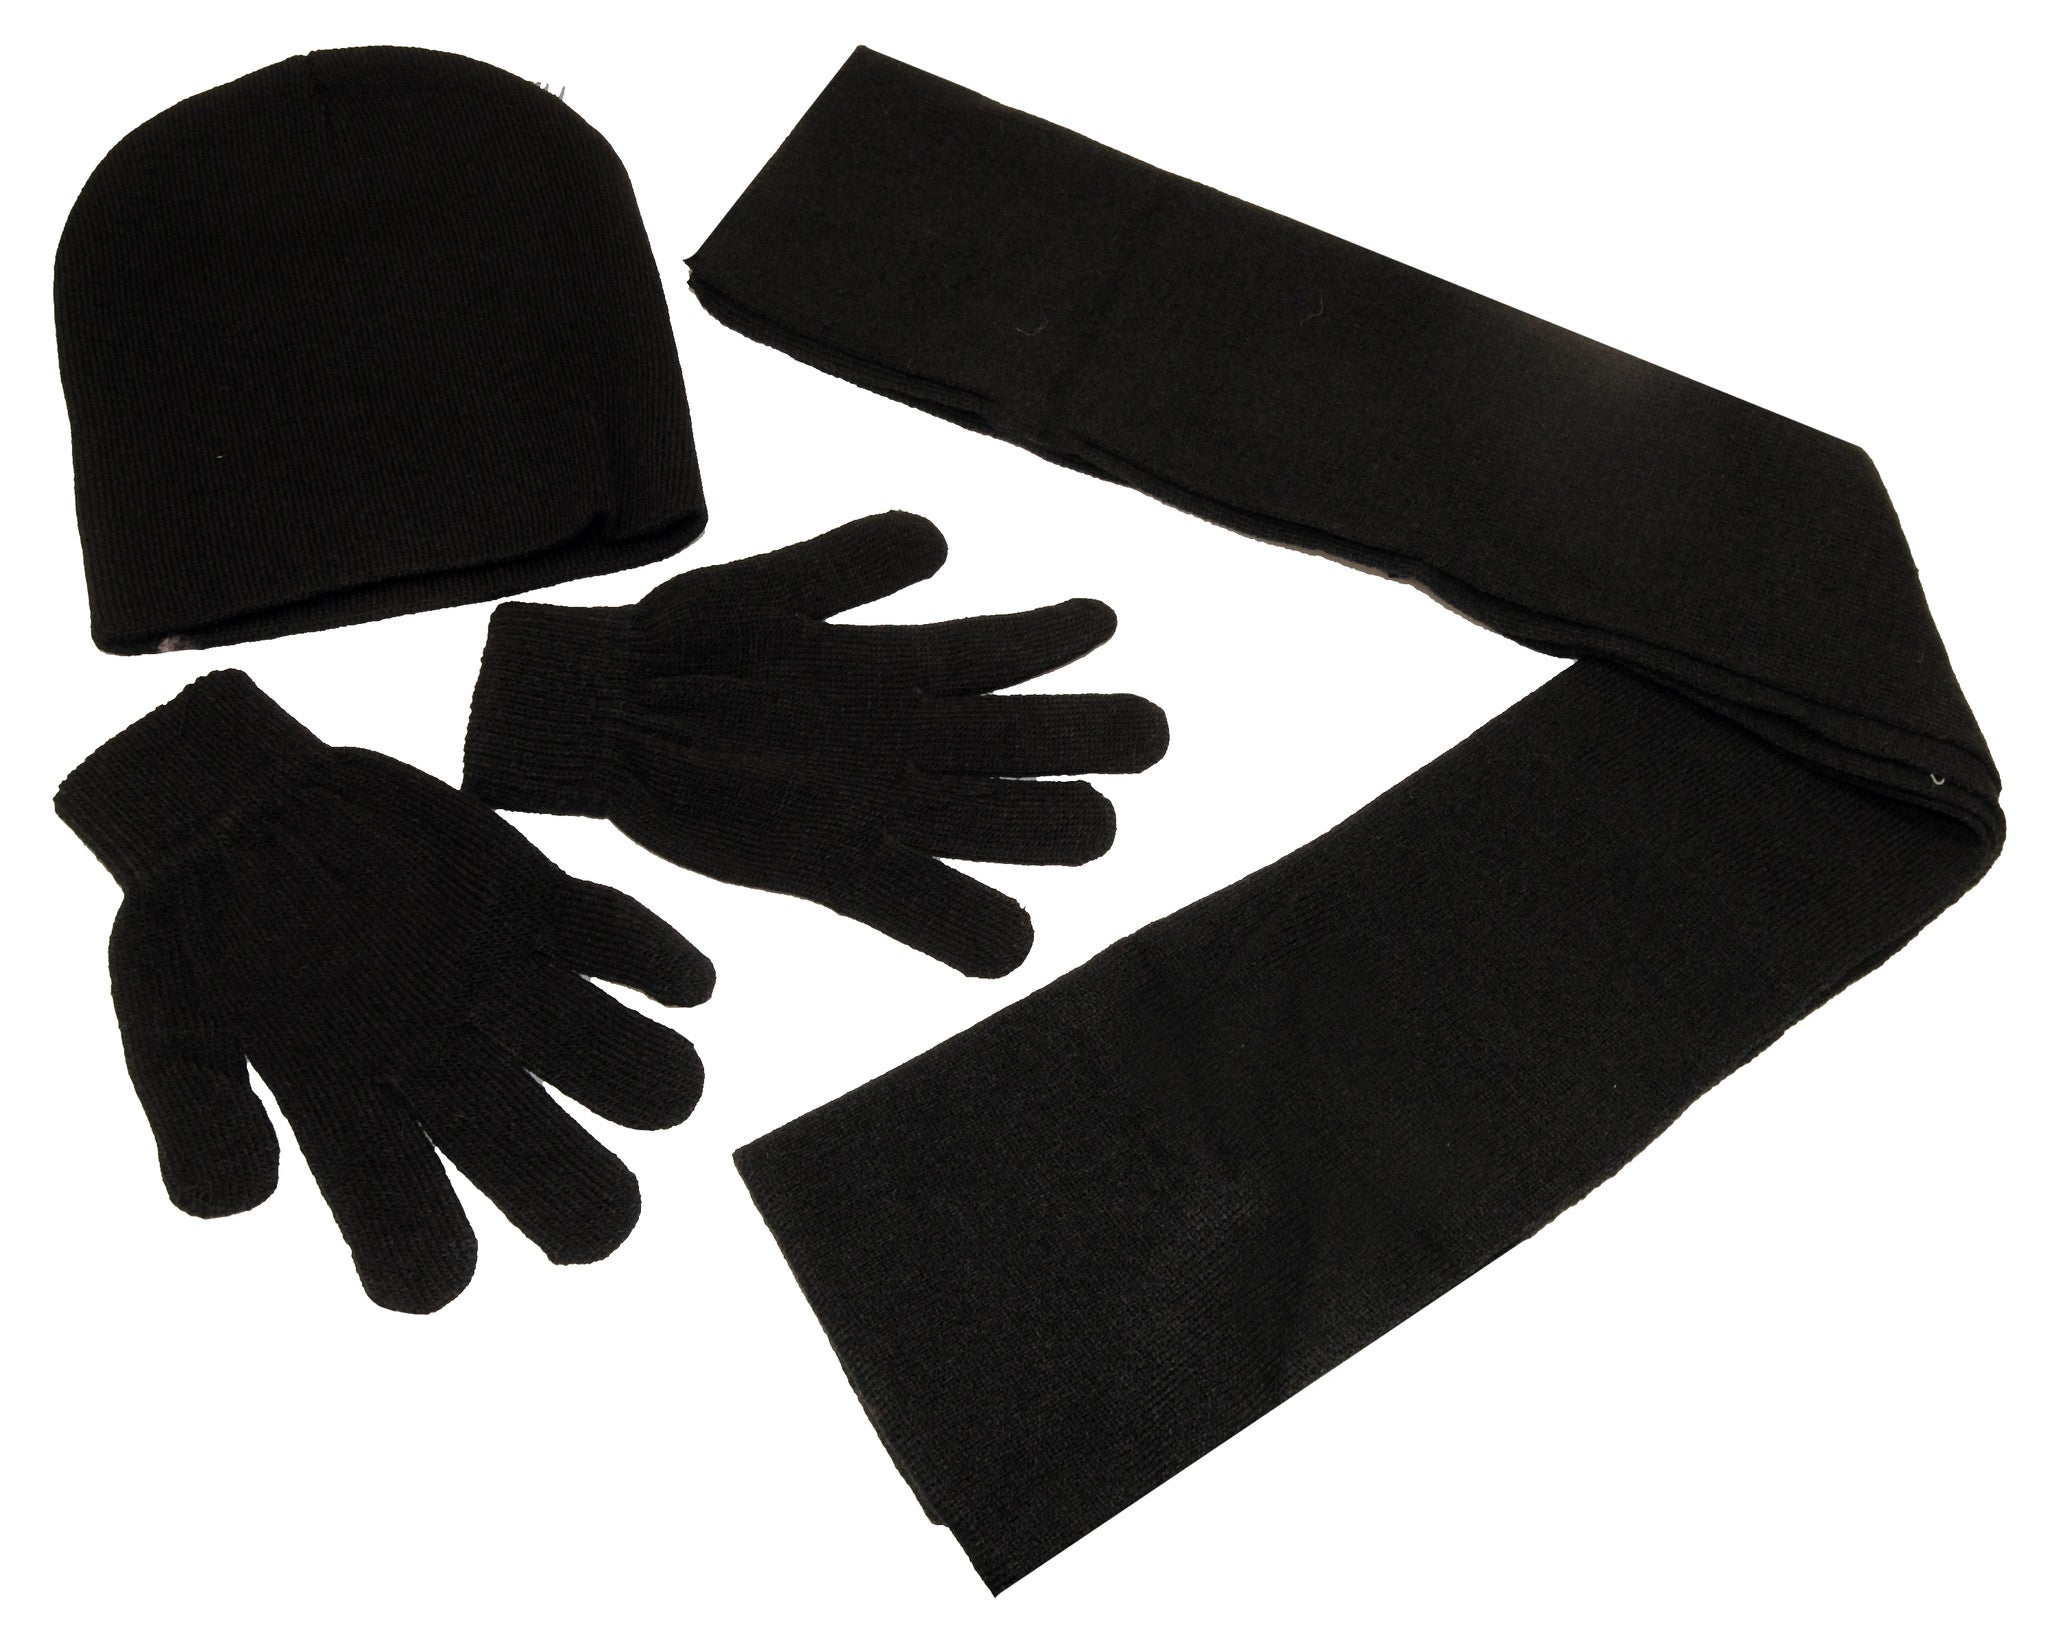 Black knit hat, gloves and scarf set for adults, Personal Accessories - Presence